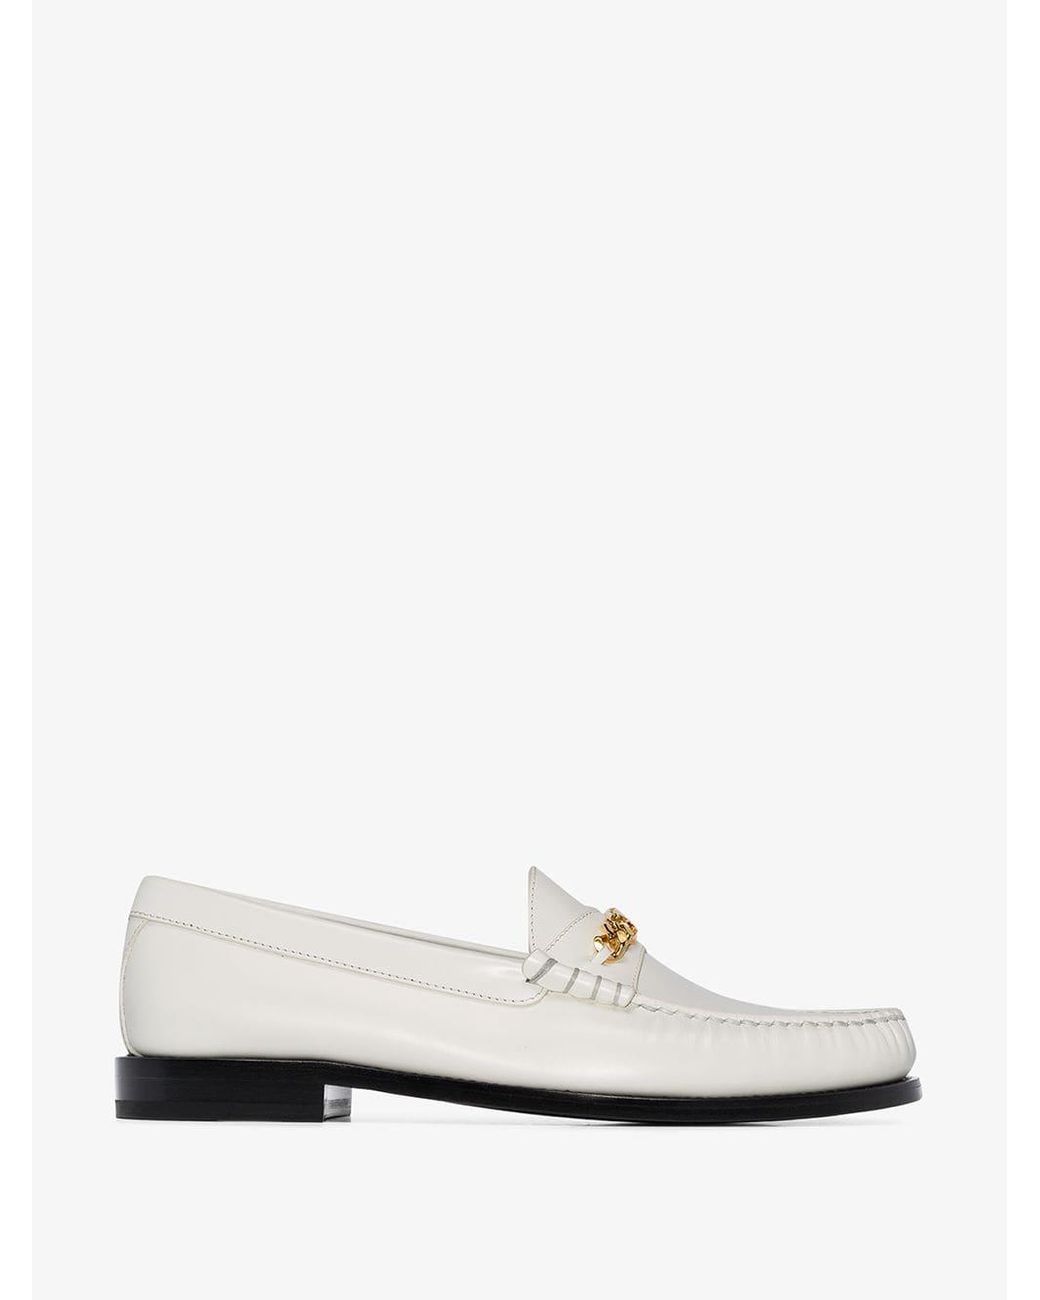 Celine Triomphe Flat Leather Loafers in White | Lyst